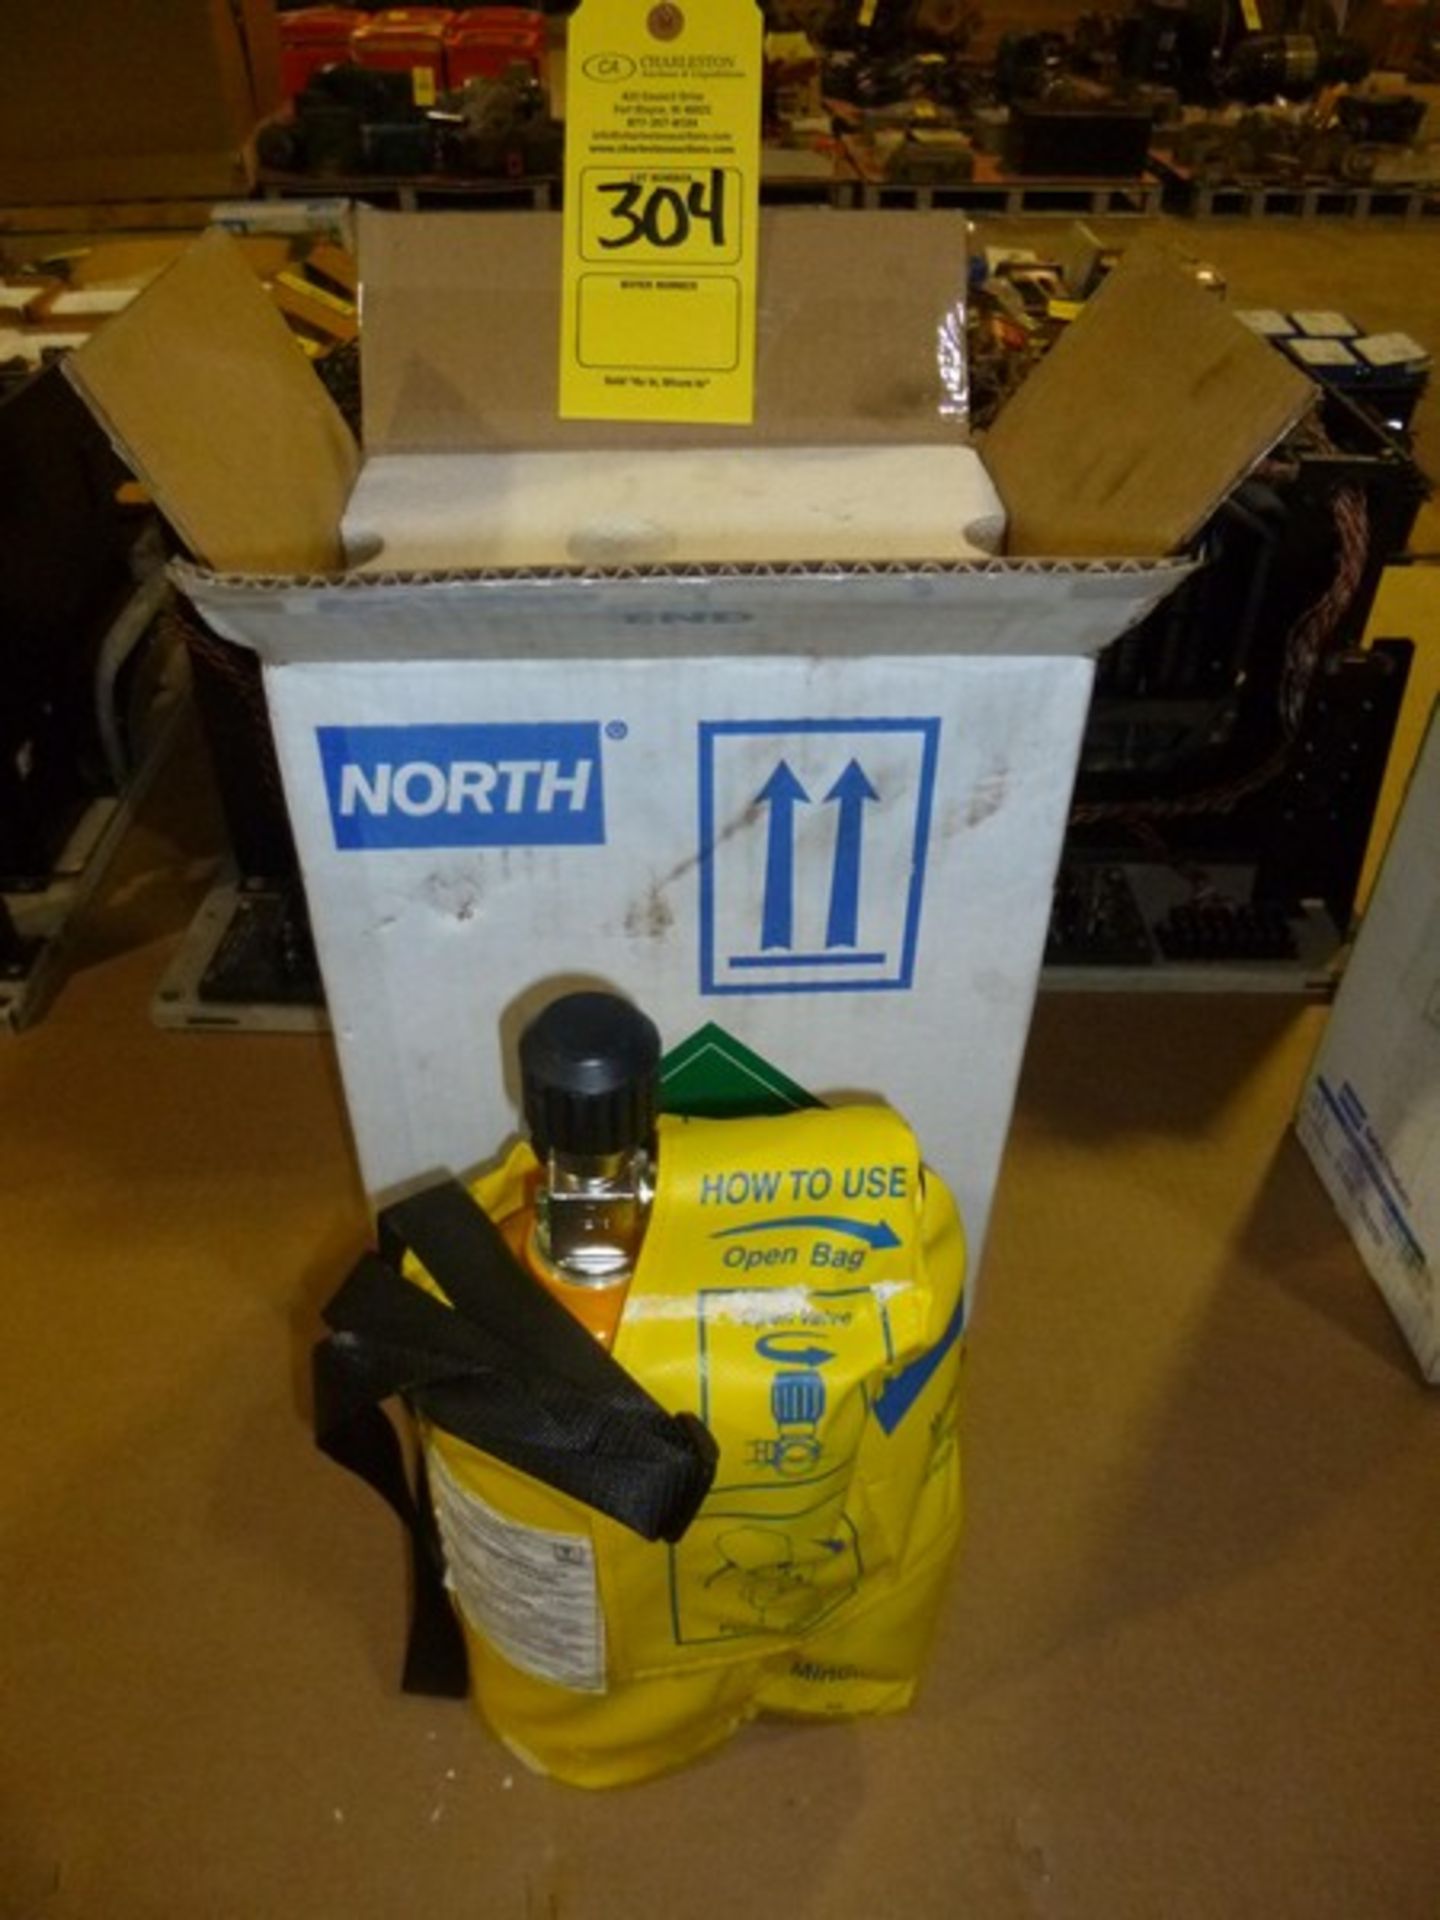 North Safety Emergency Escape Breathing Apparatus Model 845. New in box